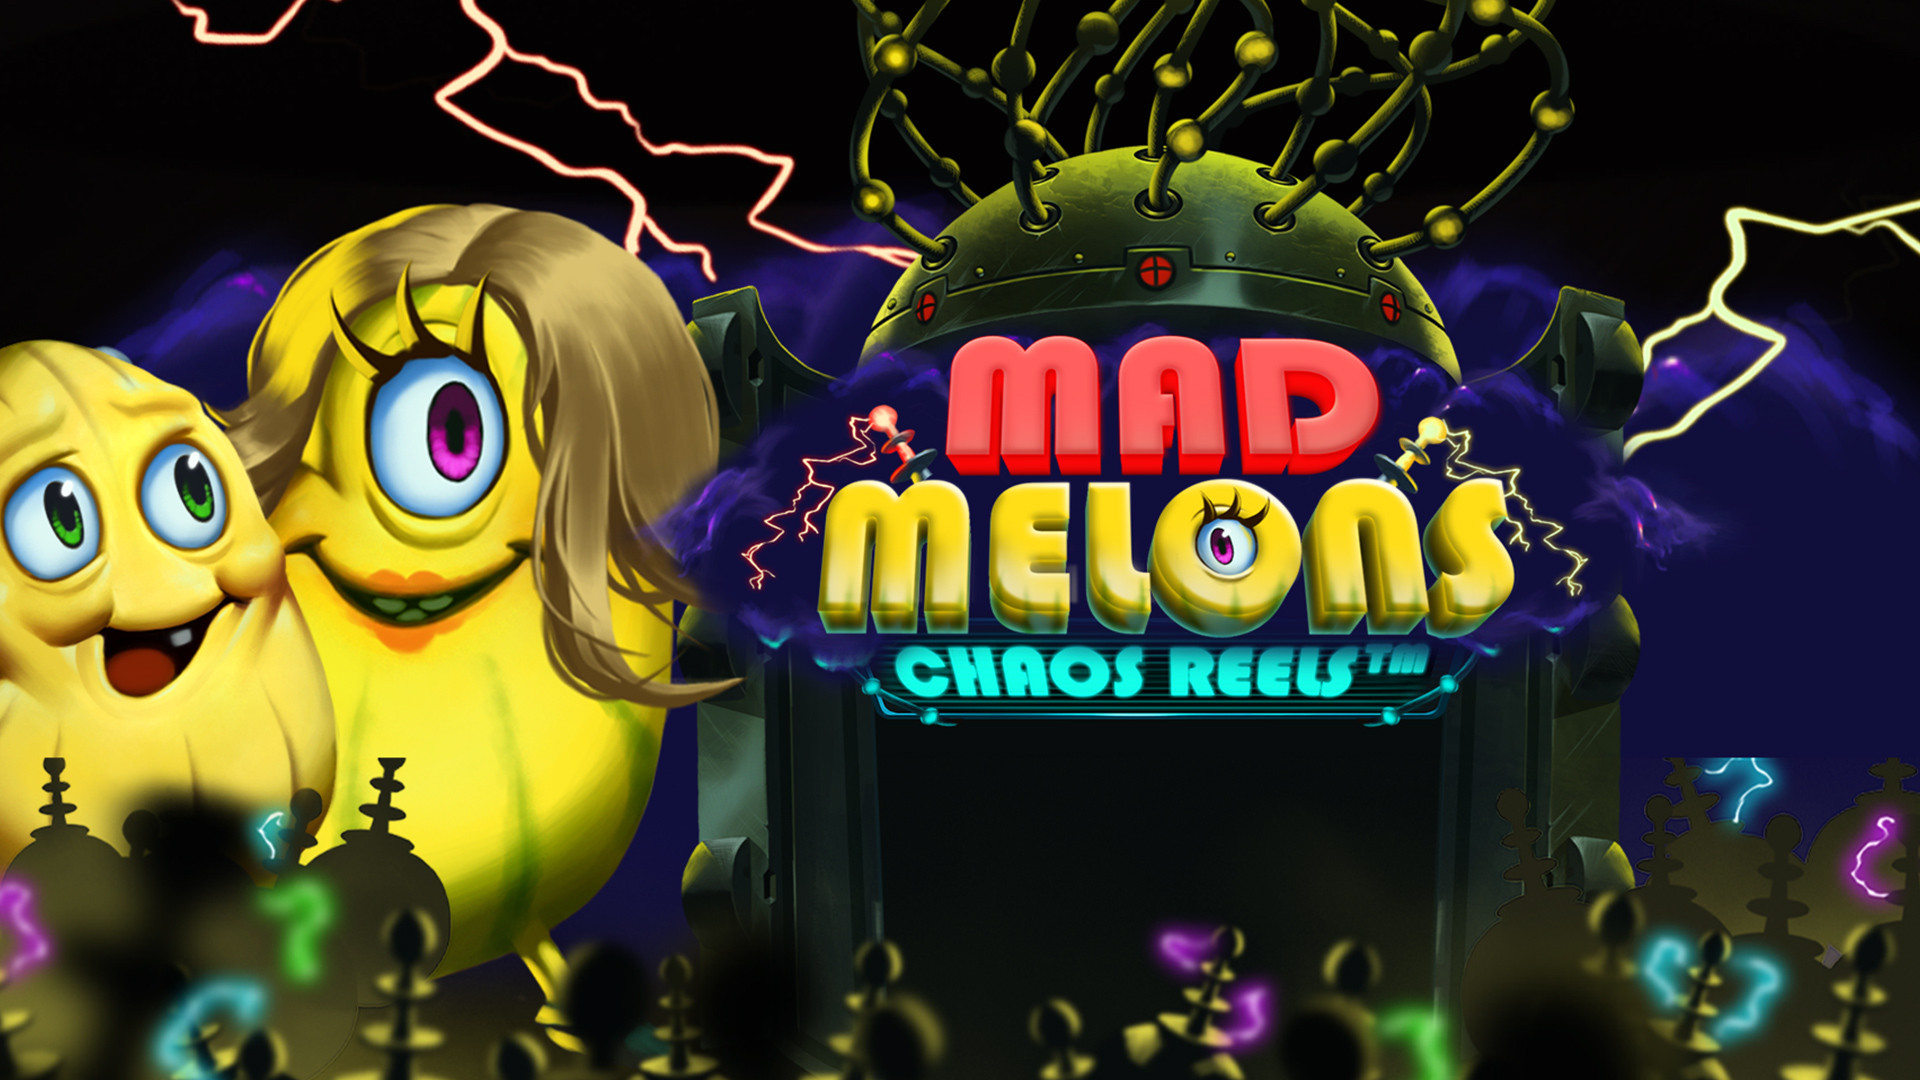 Mad Melons Chaos Reels